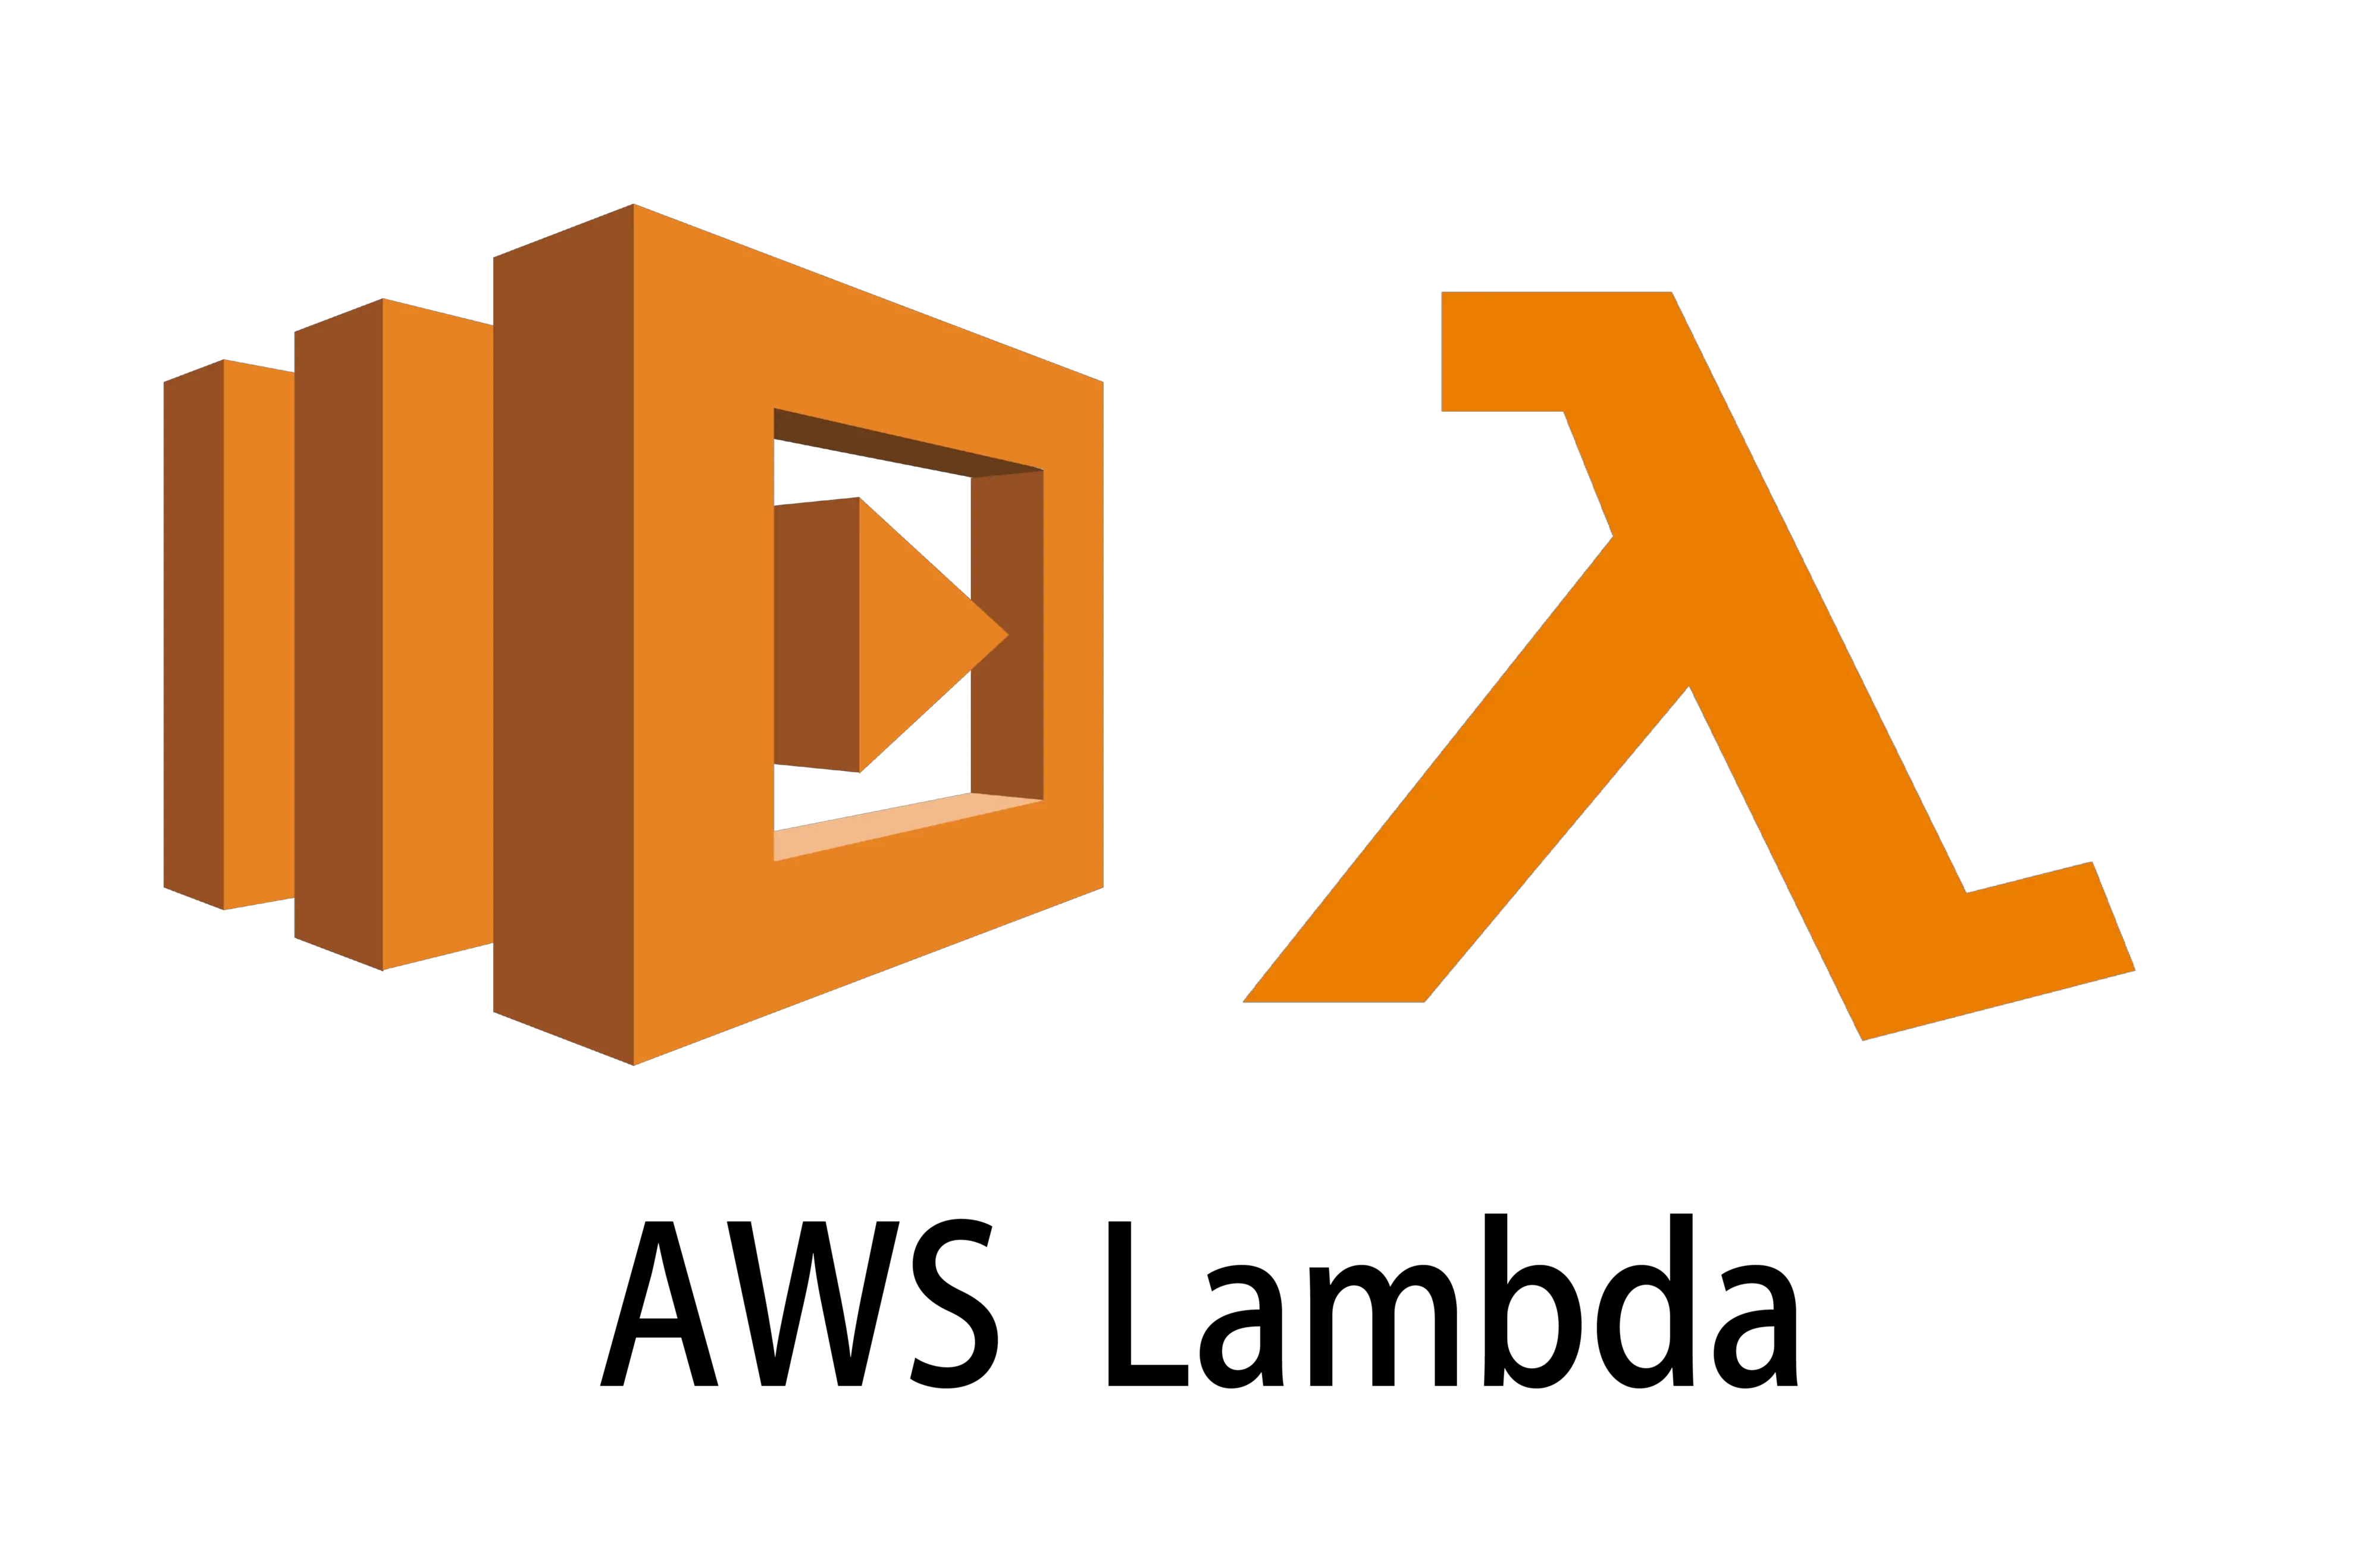 Getting Started with AWS Lambda. A Complete Guide with Node.js Examples